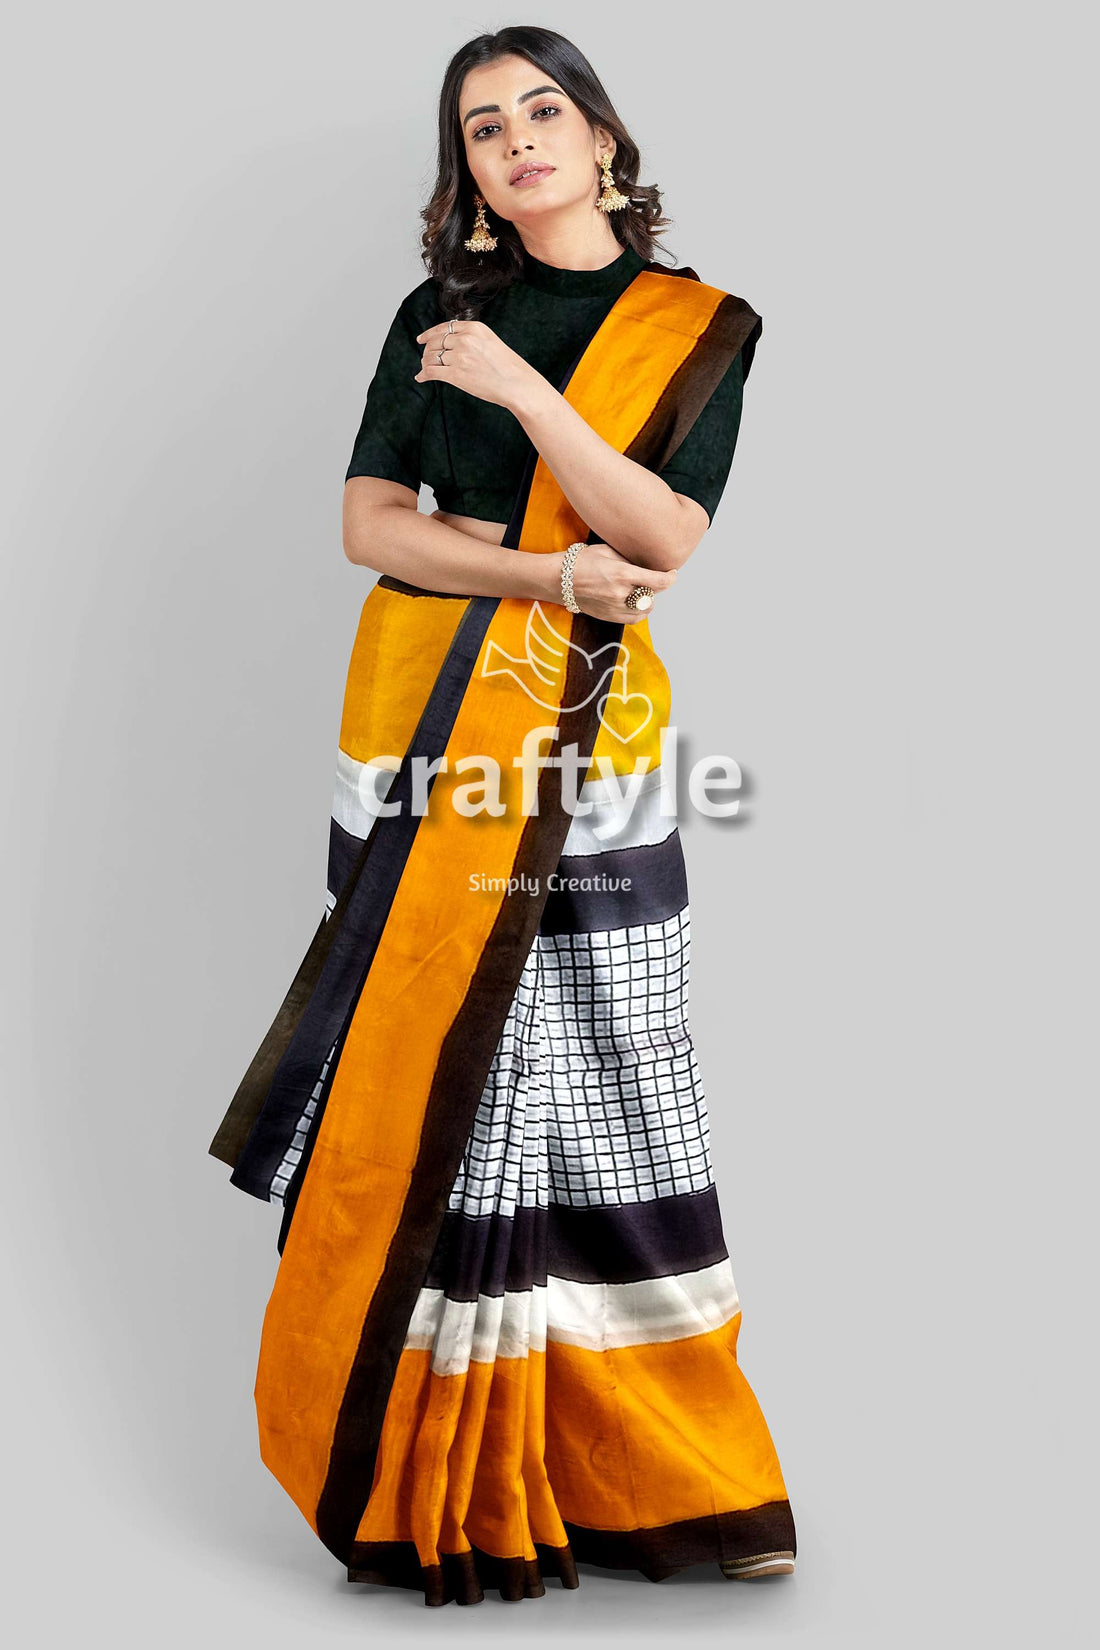 Hand Block Print Mulberry Pure Silk Saree - Golden Yellow and Black - Craftyle